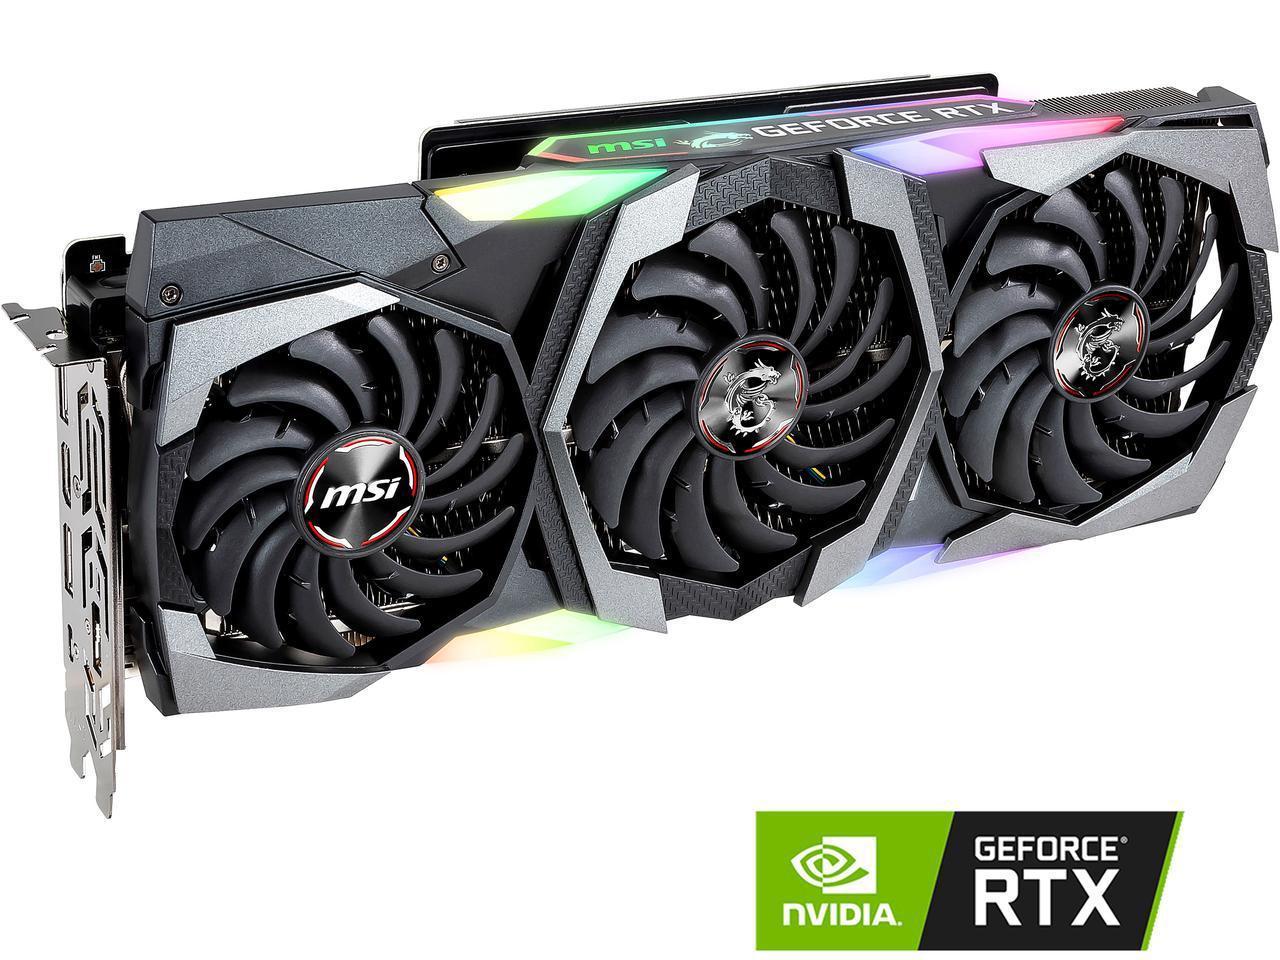 MSI GeForce RTX 2080 Gaming X Trio Graphics Card - image 2 of 3